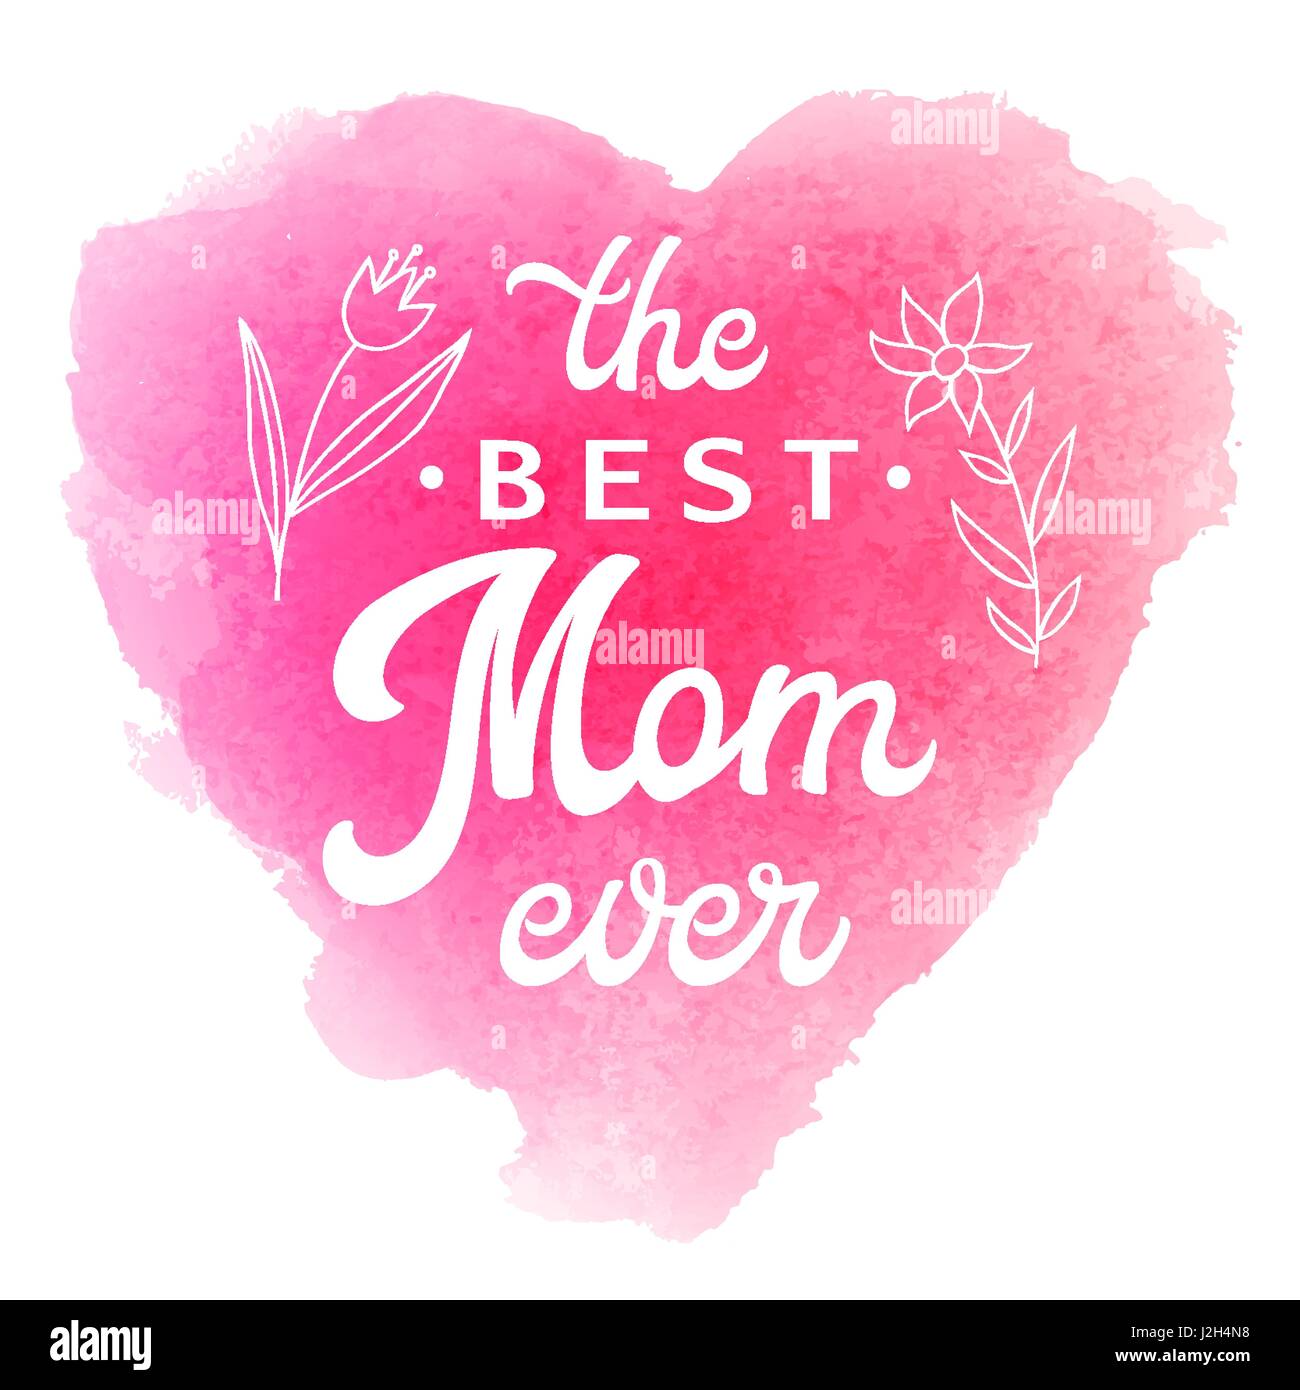 https://c8.alamy.com/comp/J2H4N8/best-mom-ever-greeting-card-with-flowers-and-hand-lettering-text-on-J2H4N8.jpg